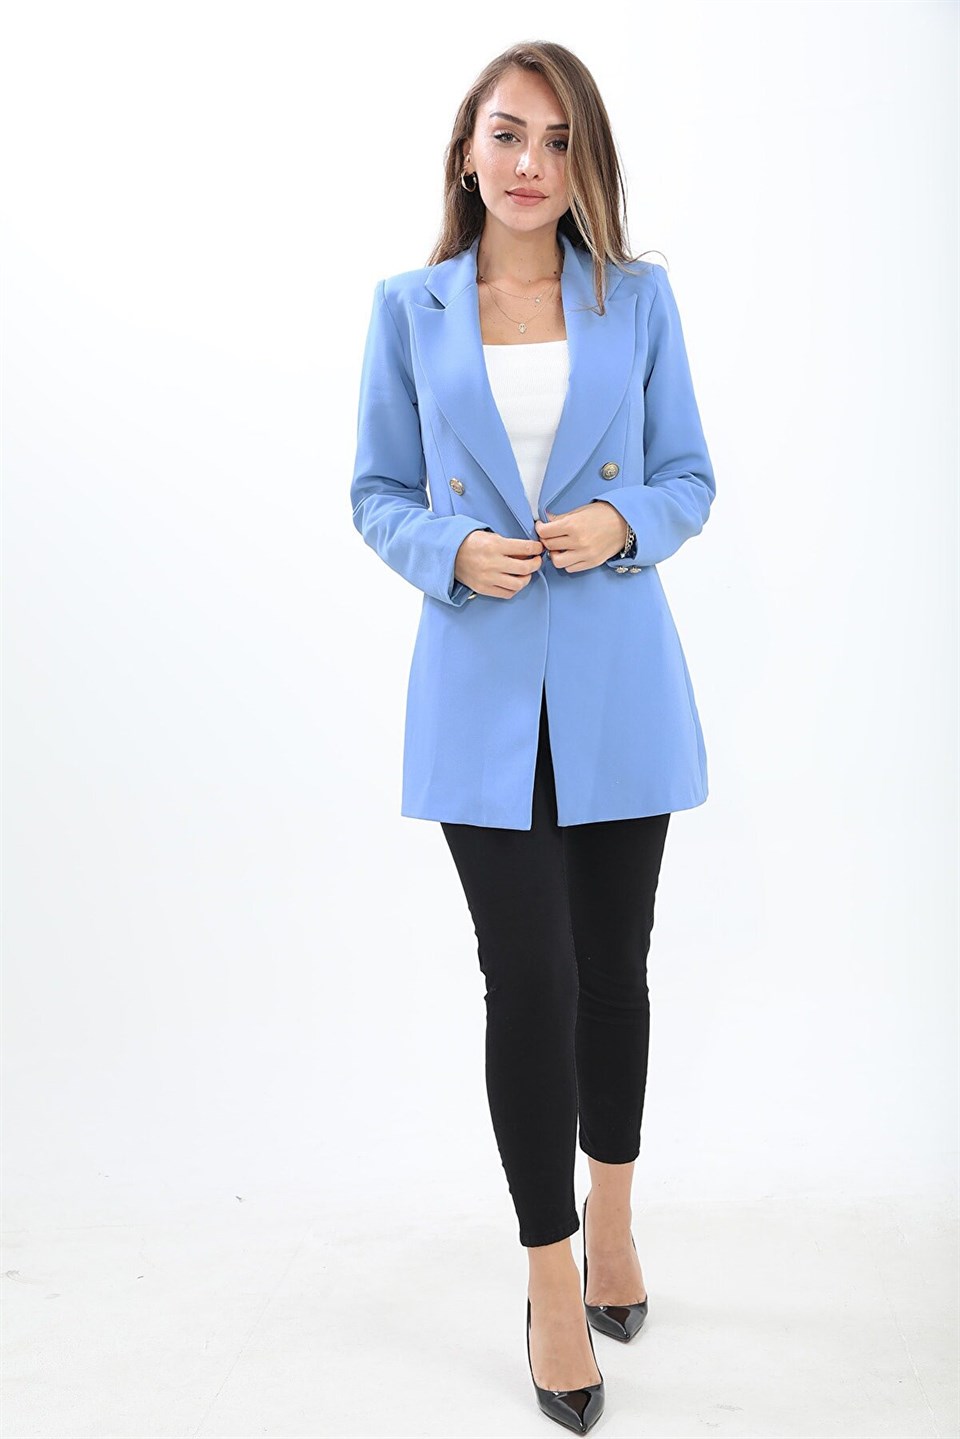 Padded Shoulders with Snap Fasteners on the Front - Women's Blazer Jacket - STREETMODE™